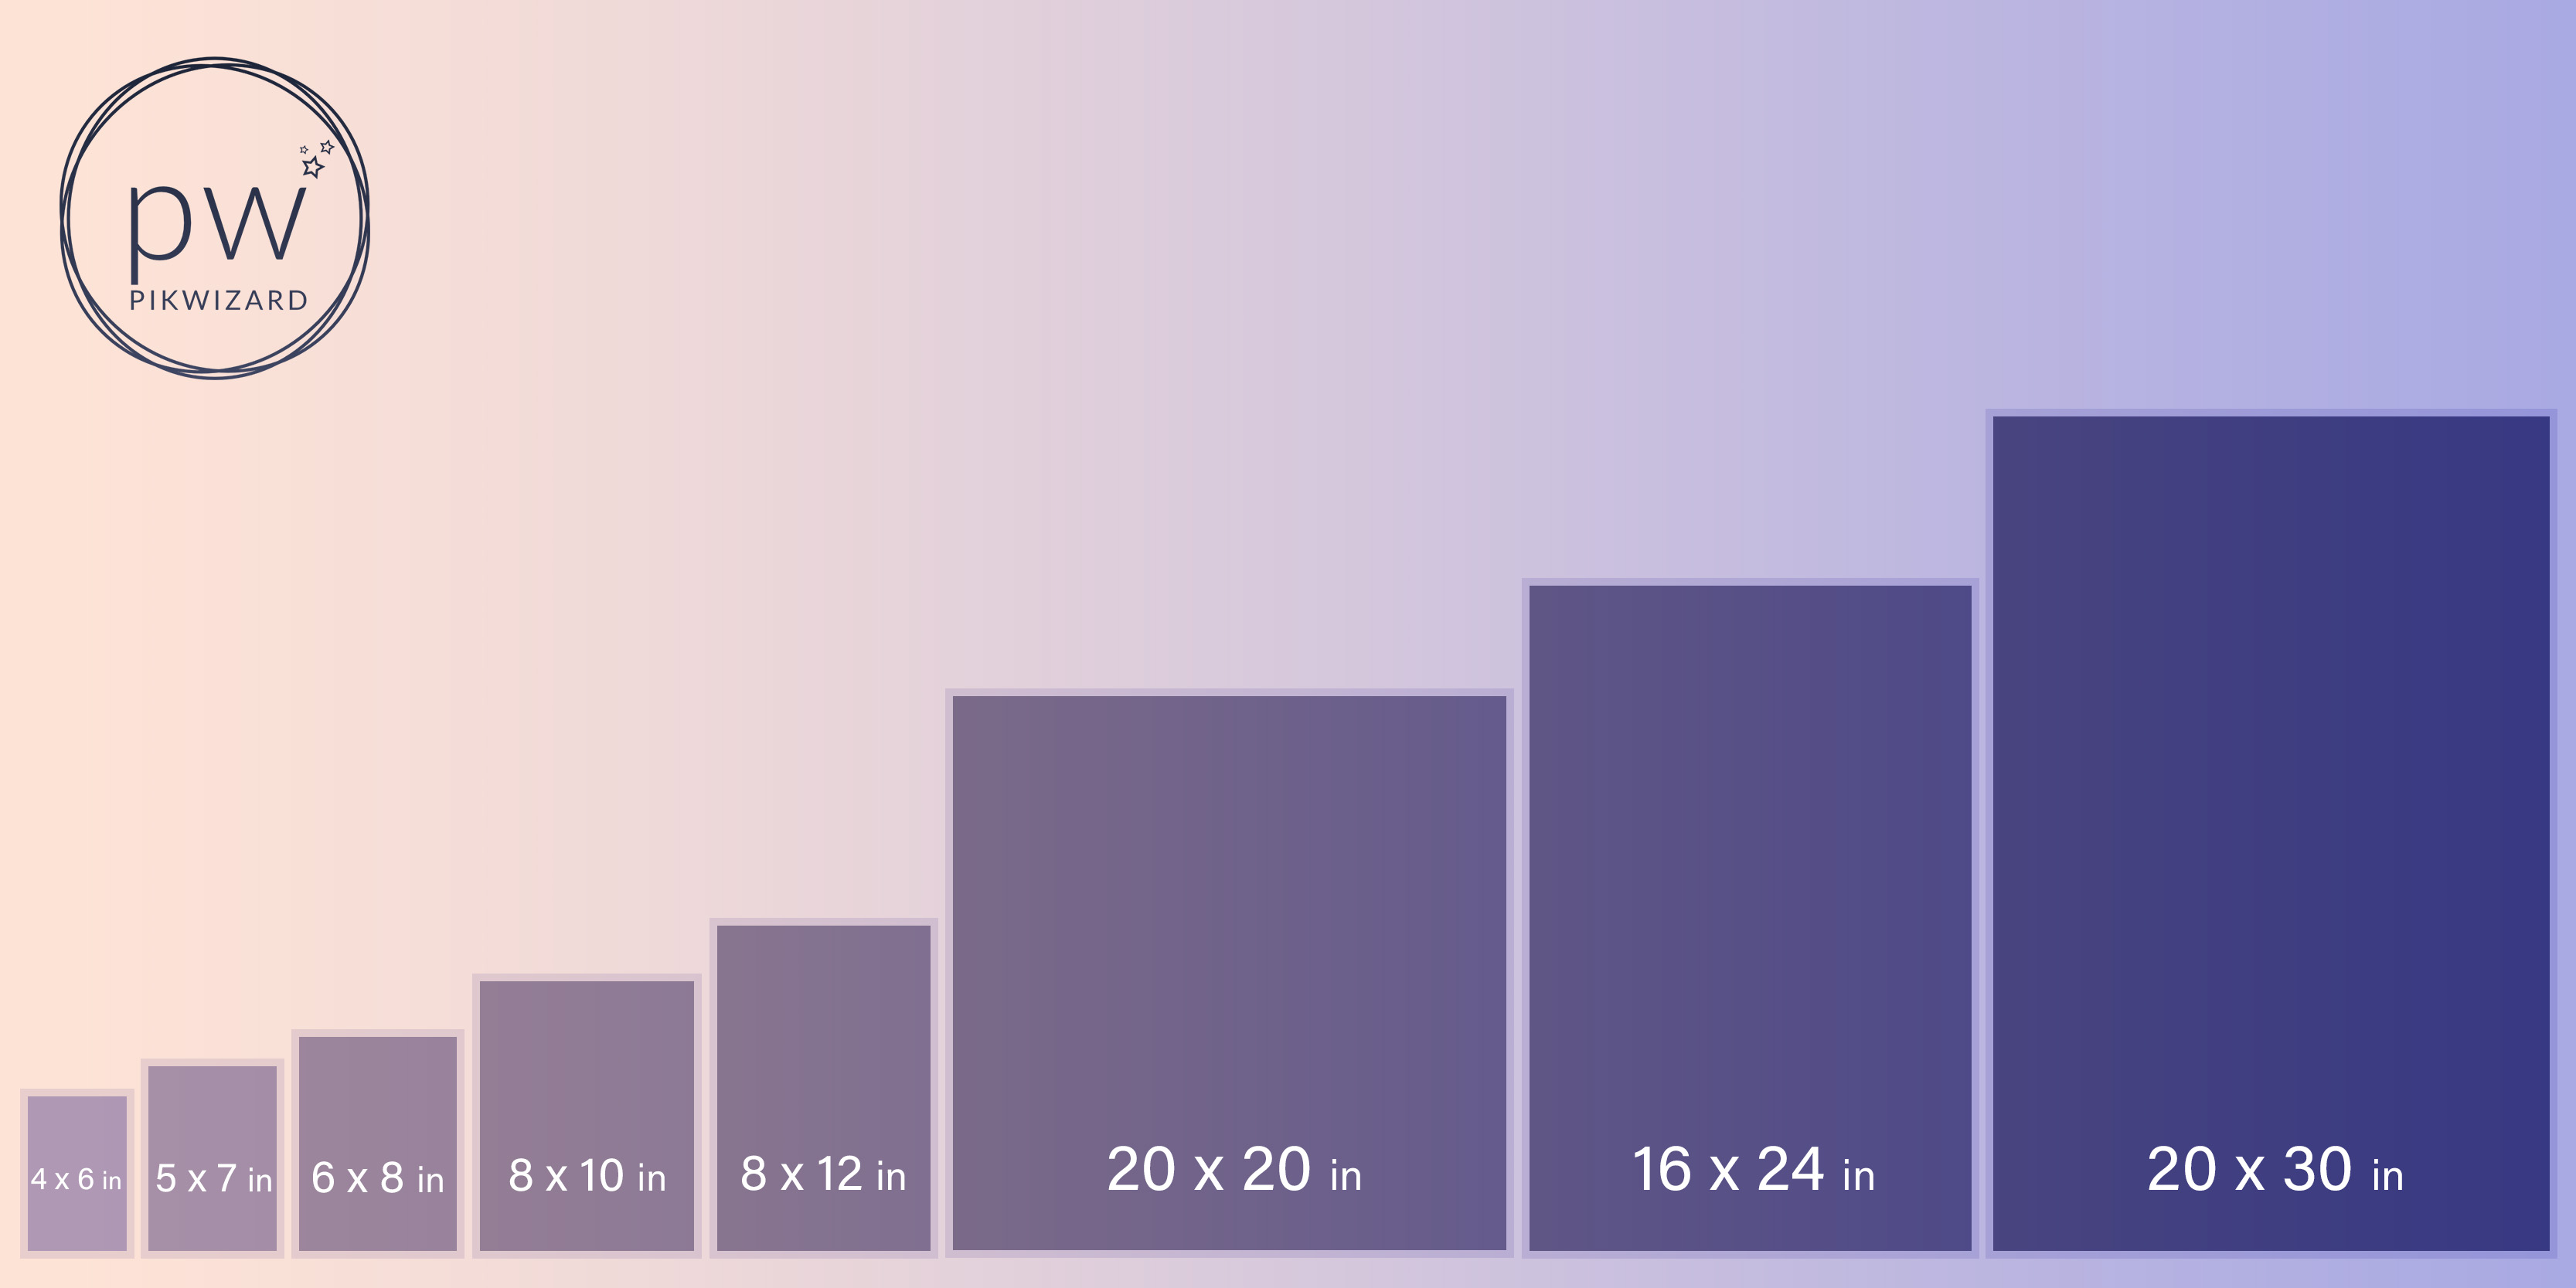 Standard photo sizes chart showing common sizes - A complete guide to standard photo sizes to find the perfect resolution & aspect ratio for your design - Image